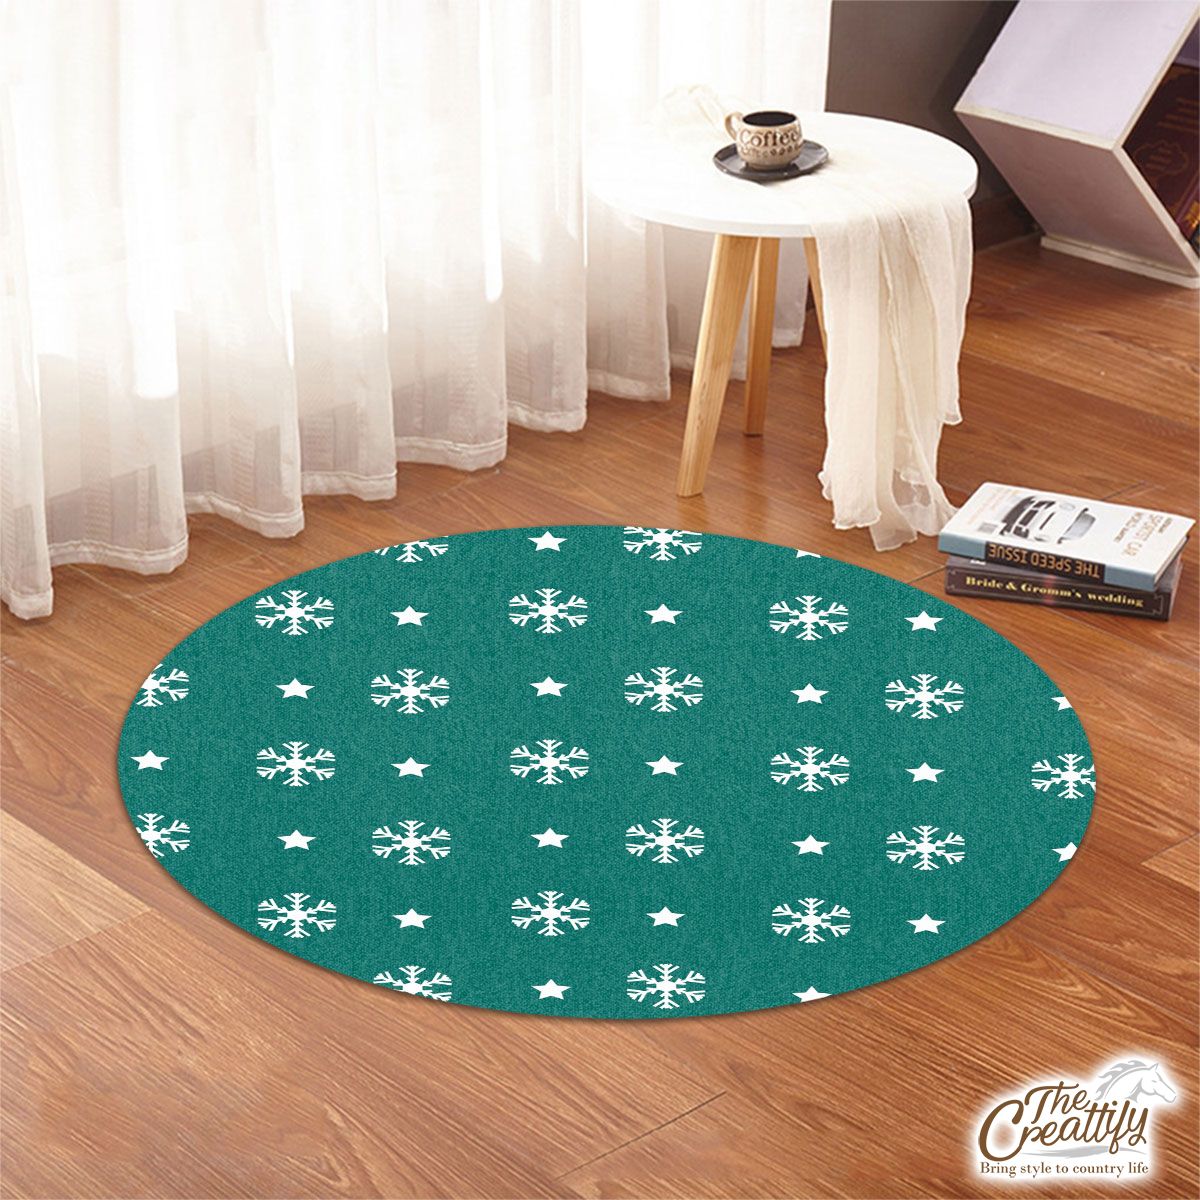 White And Dark Green Snowflake With Christmas Star Round Rug